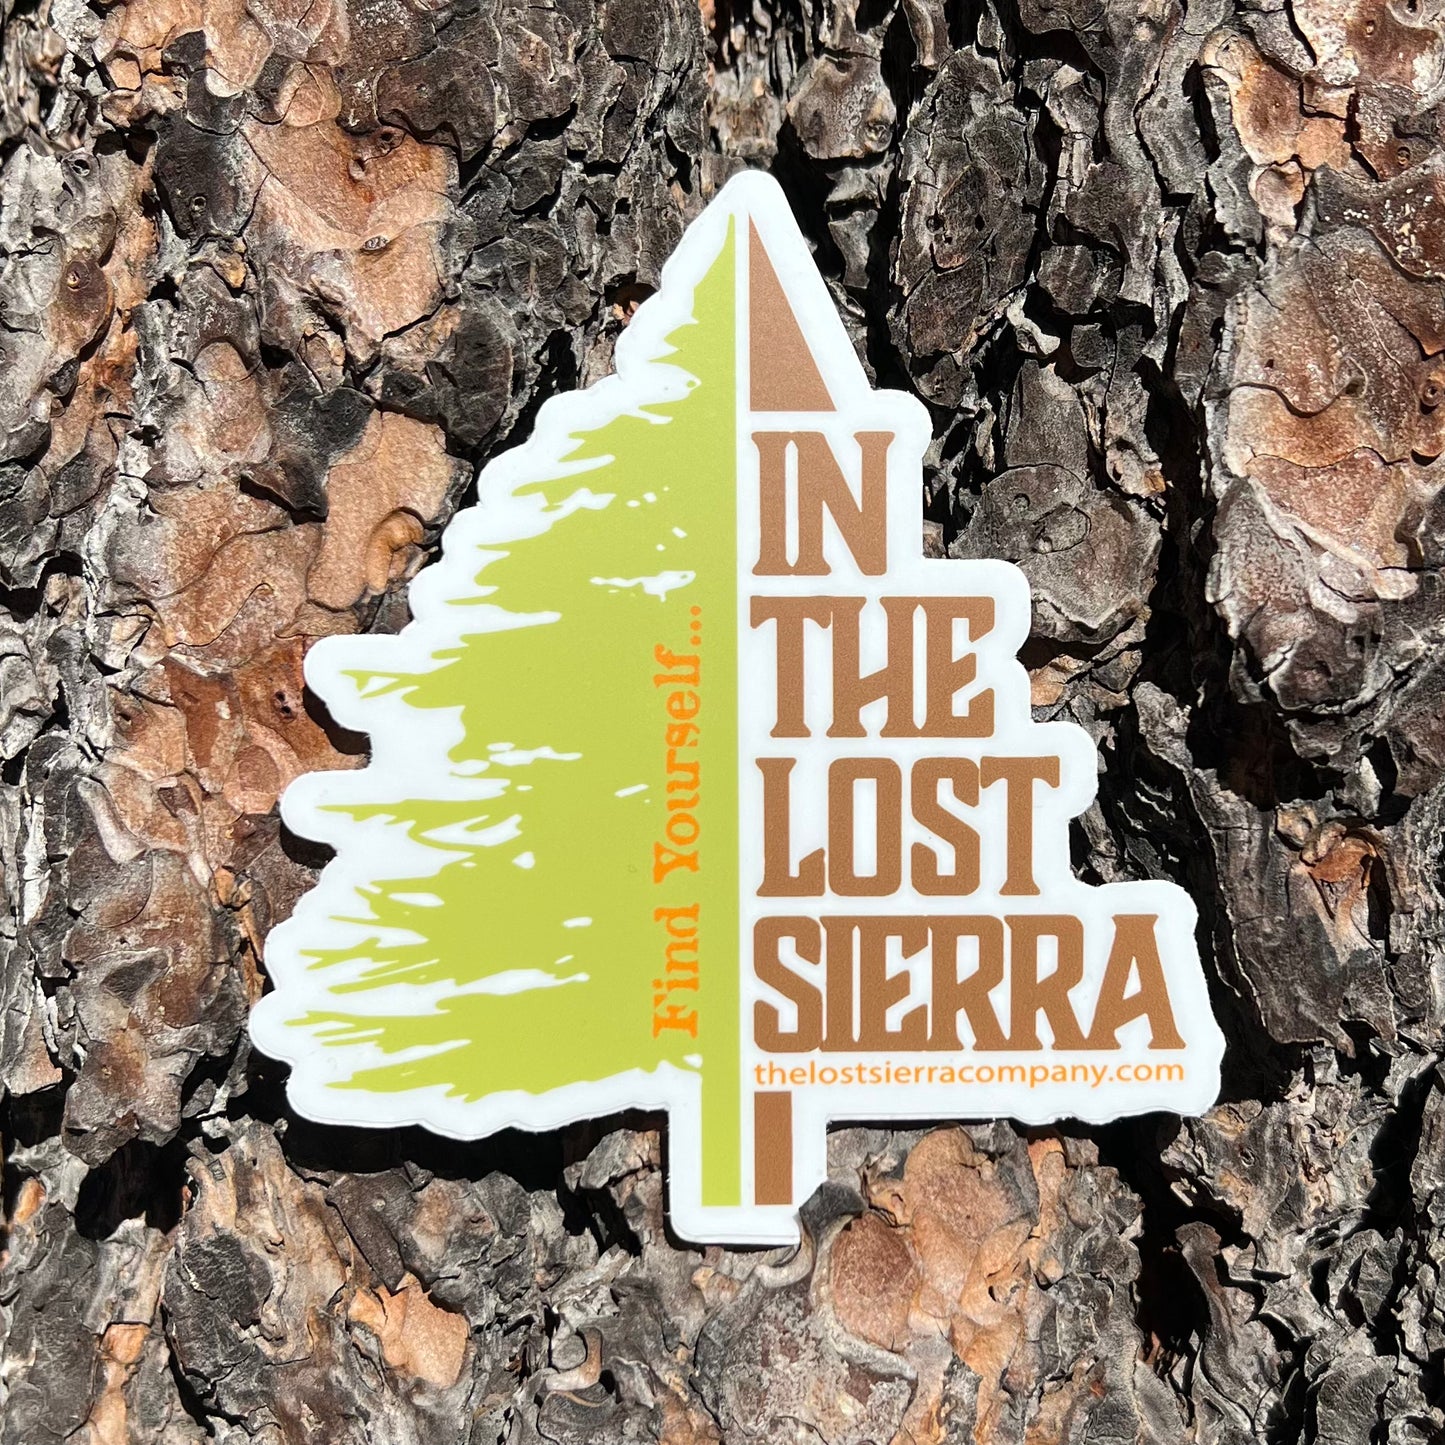 Find Yourself…. In The Lost Sierra